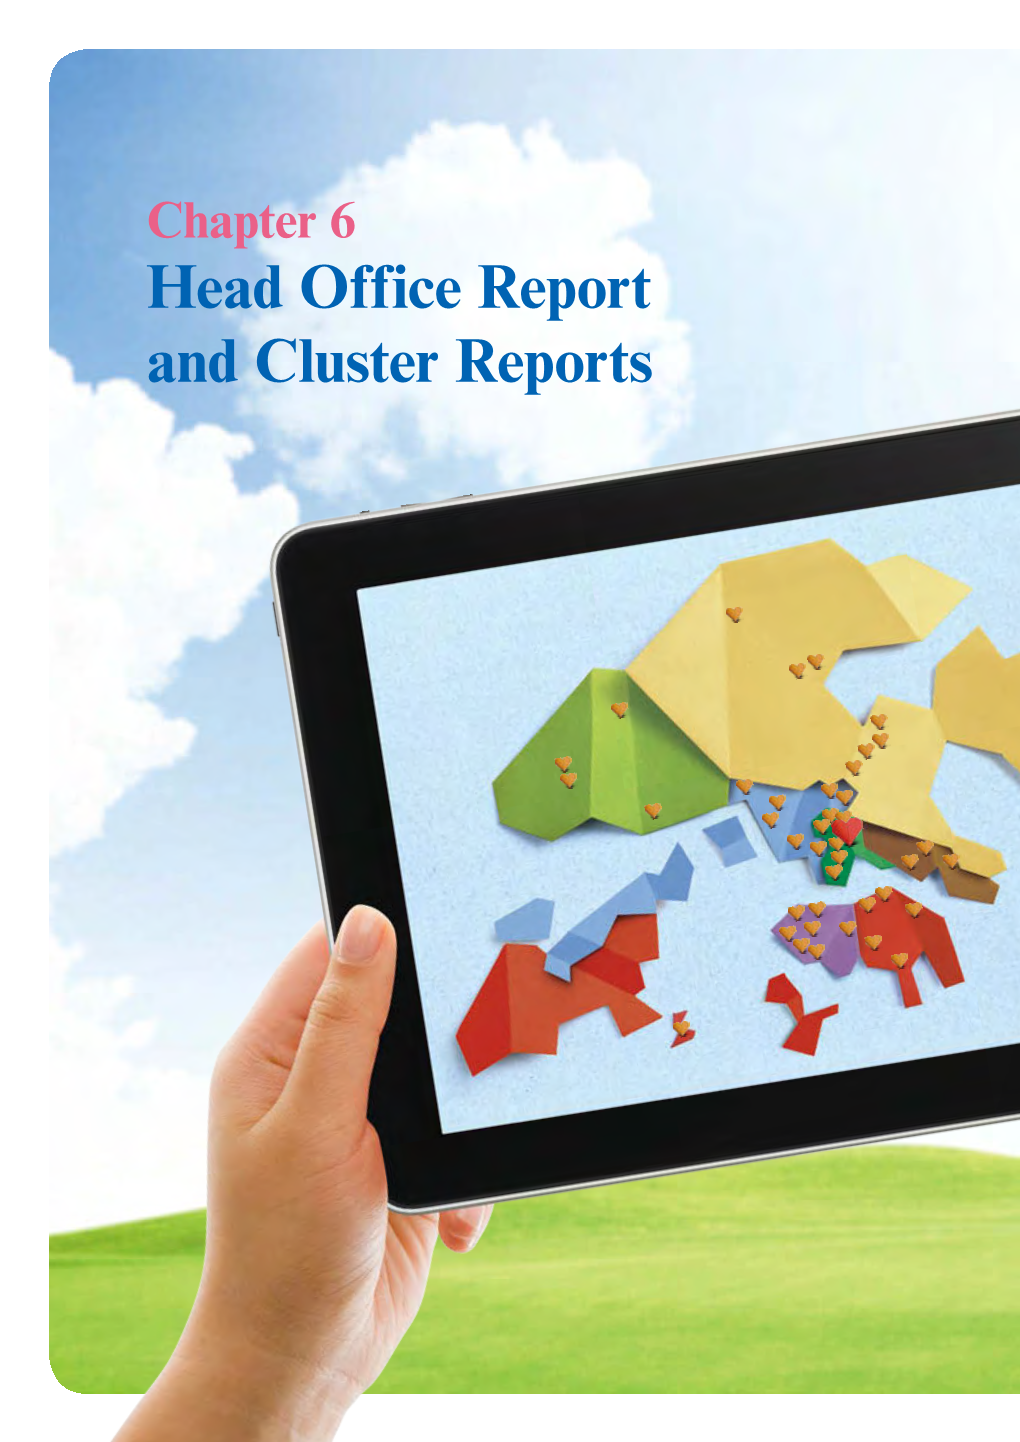 Head Office Report and Cluster Reports